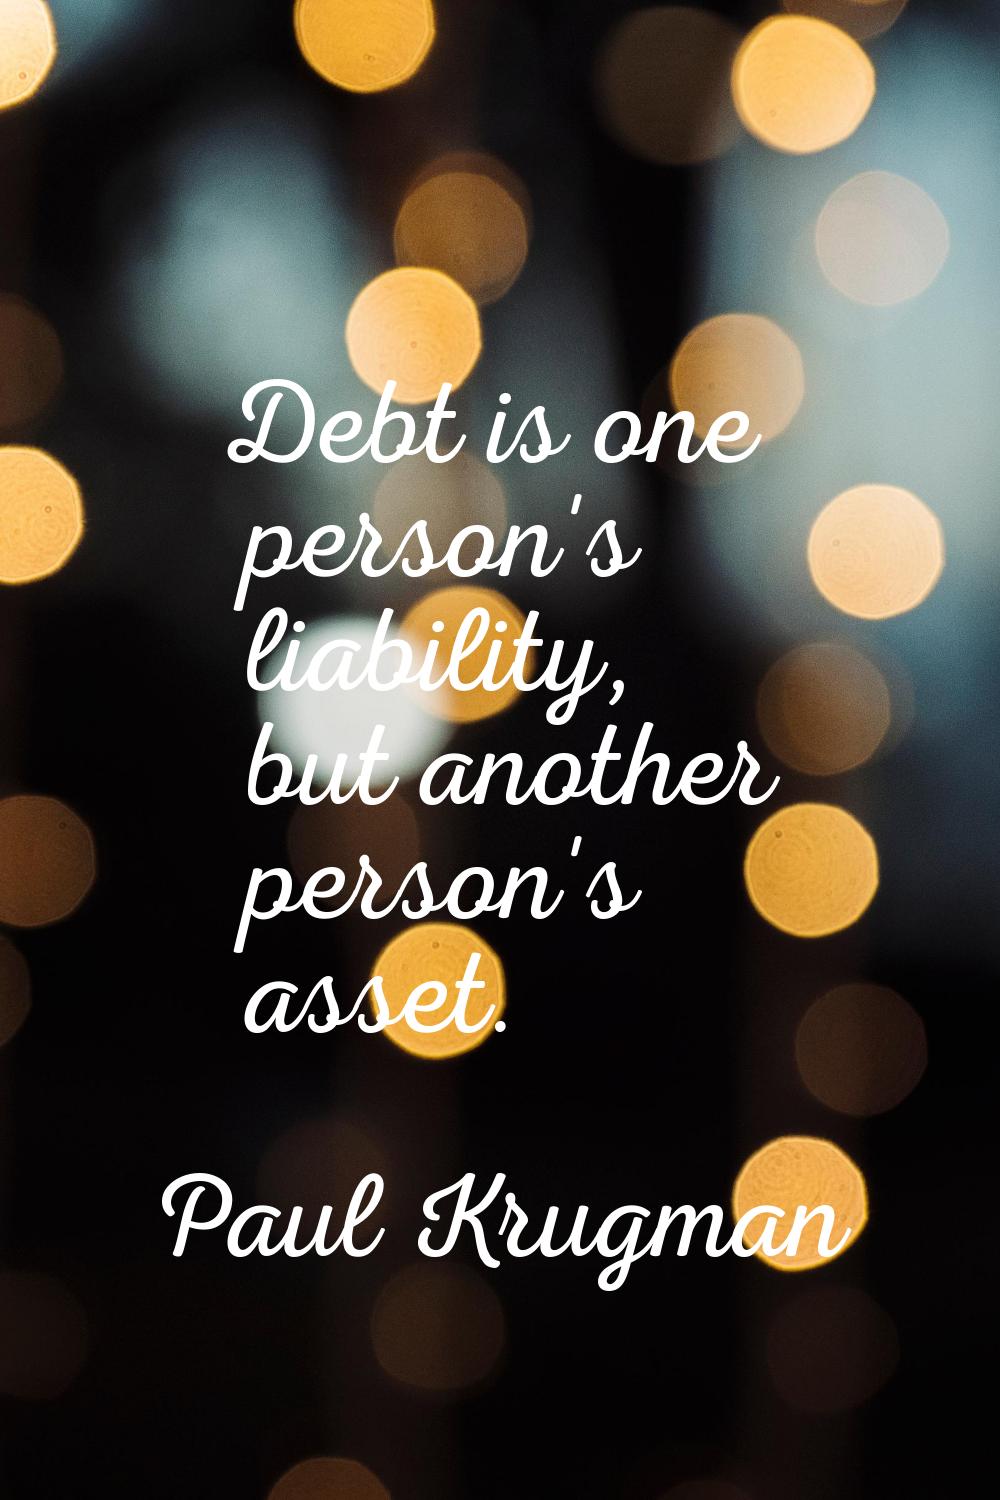 Debt is one person's liability, but another person's asset.